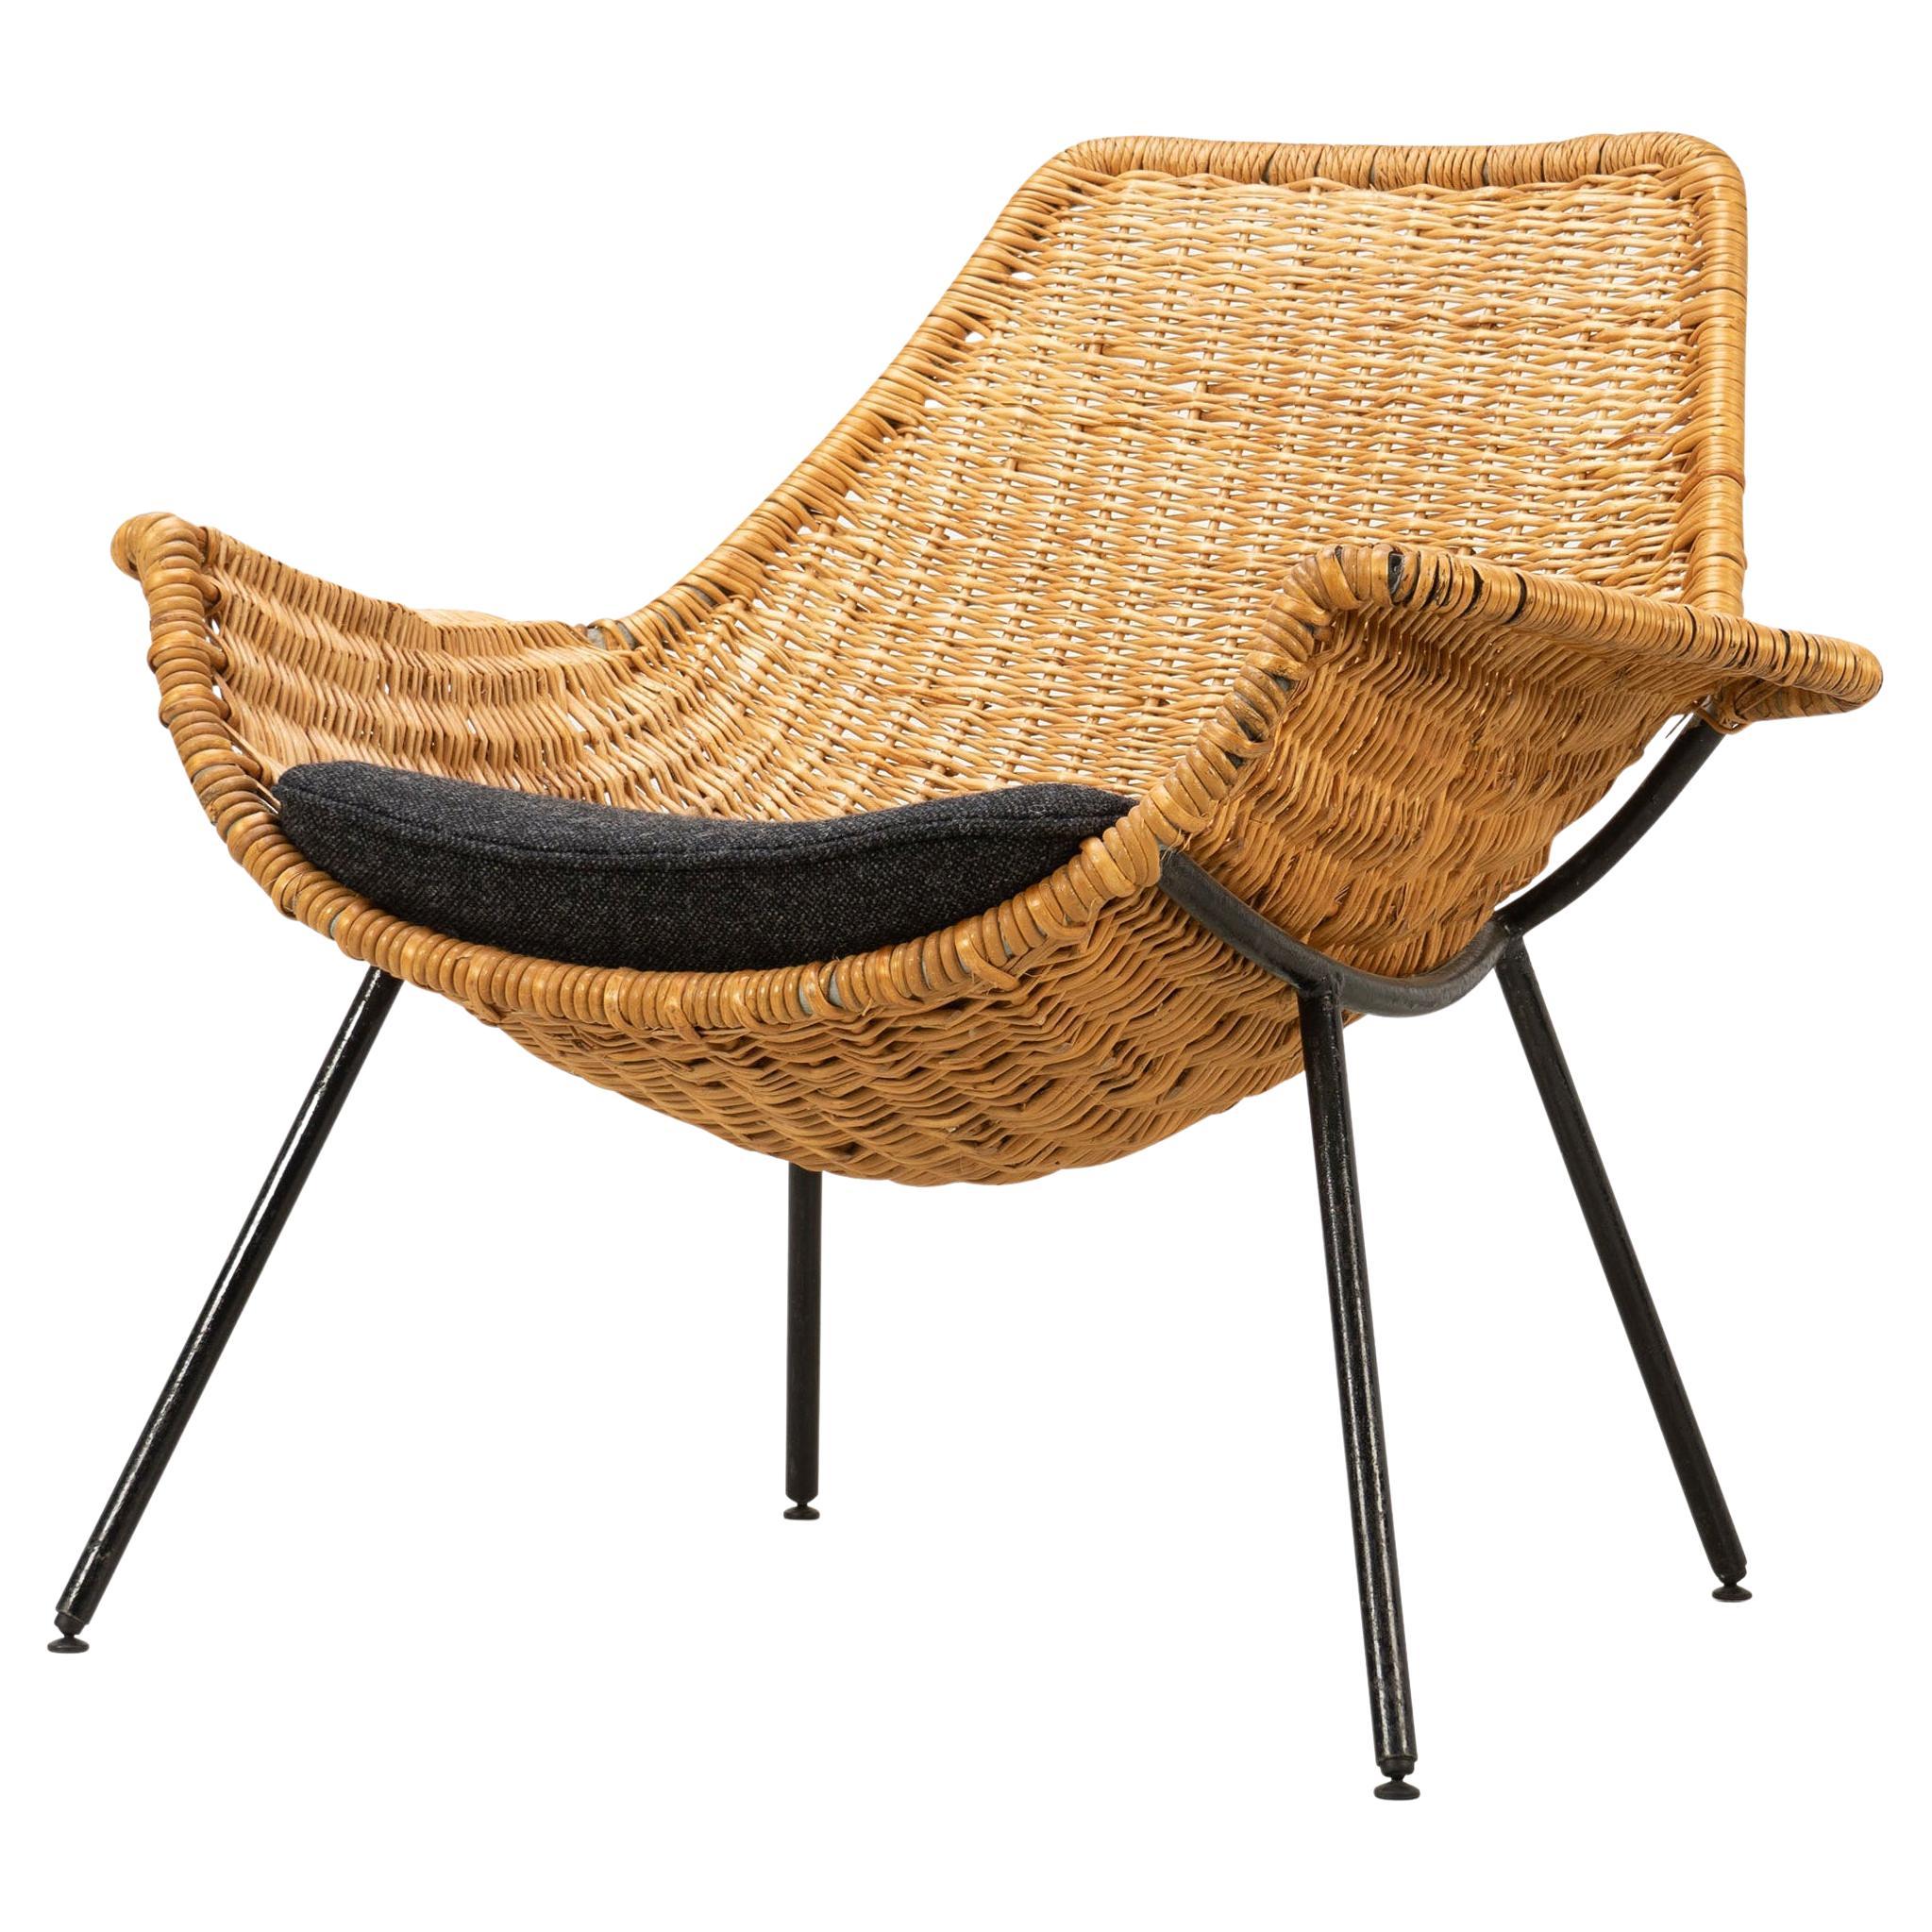 Mid-Century Modern Rattan Lounge Chair by Giancarlo De Carlo, Italy, 1954 For Sale